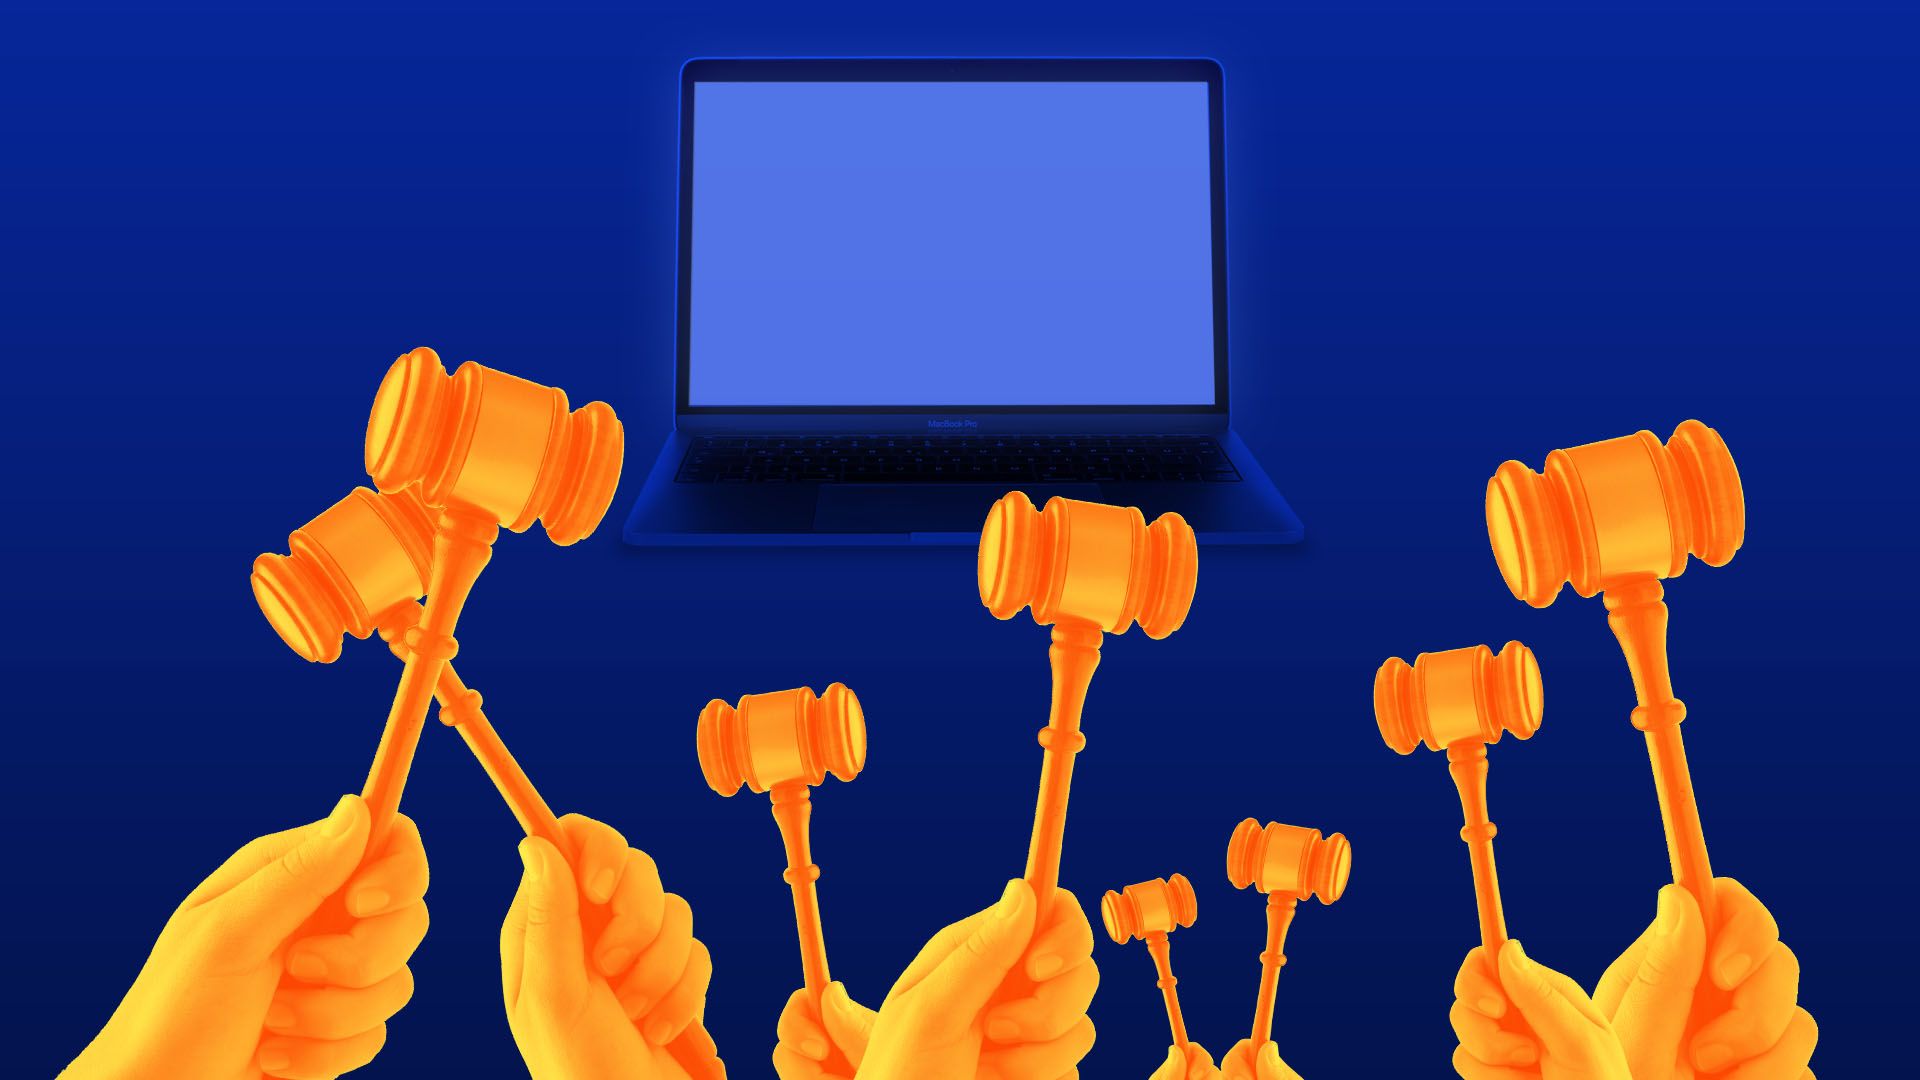  Illustration of collection of hands holding gavels in front of a laptop